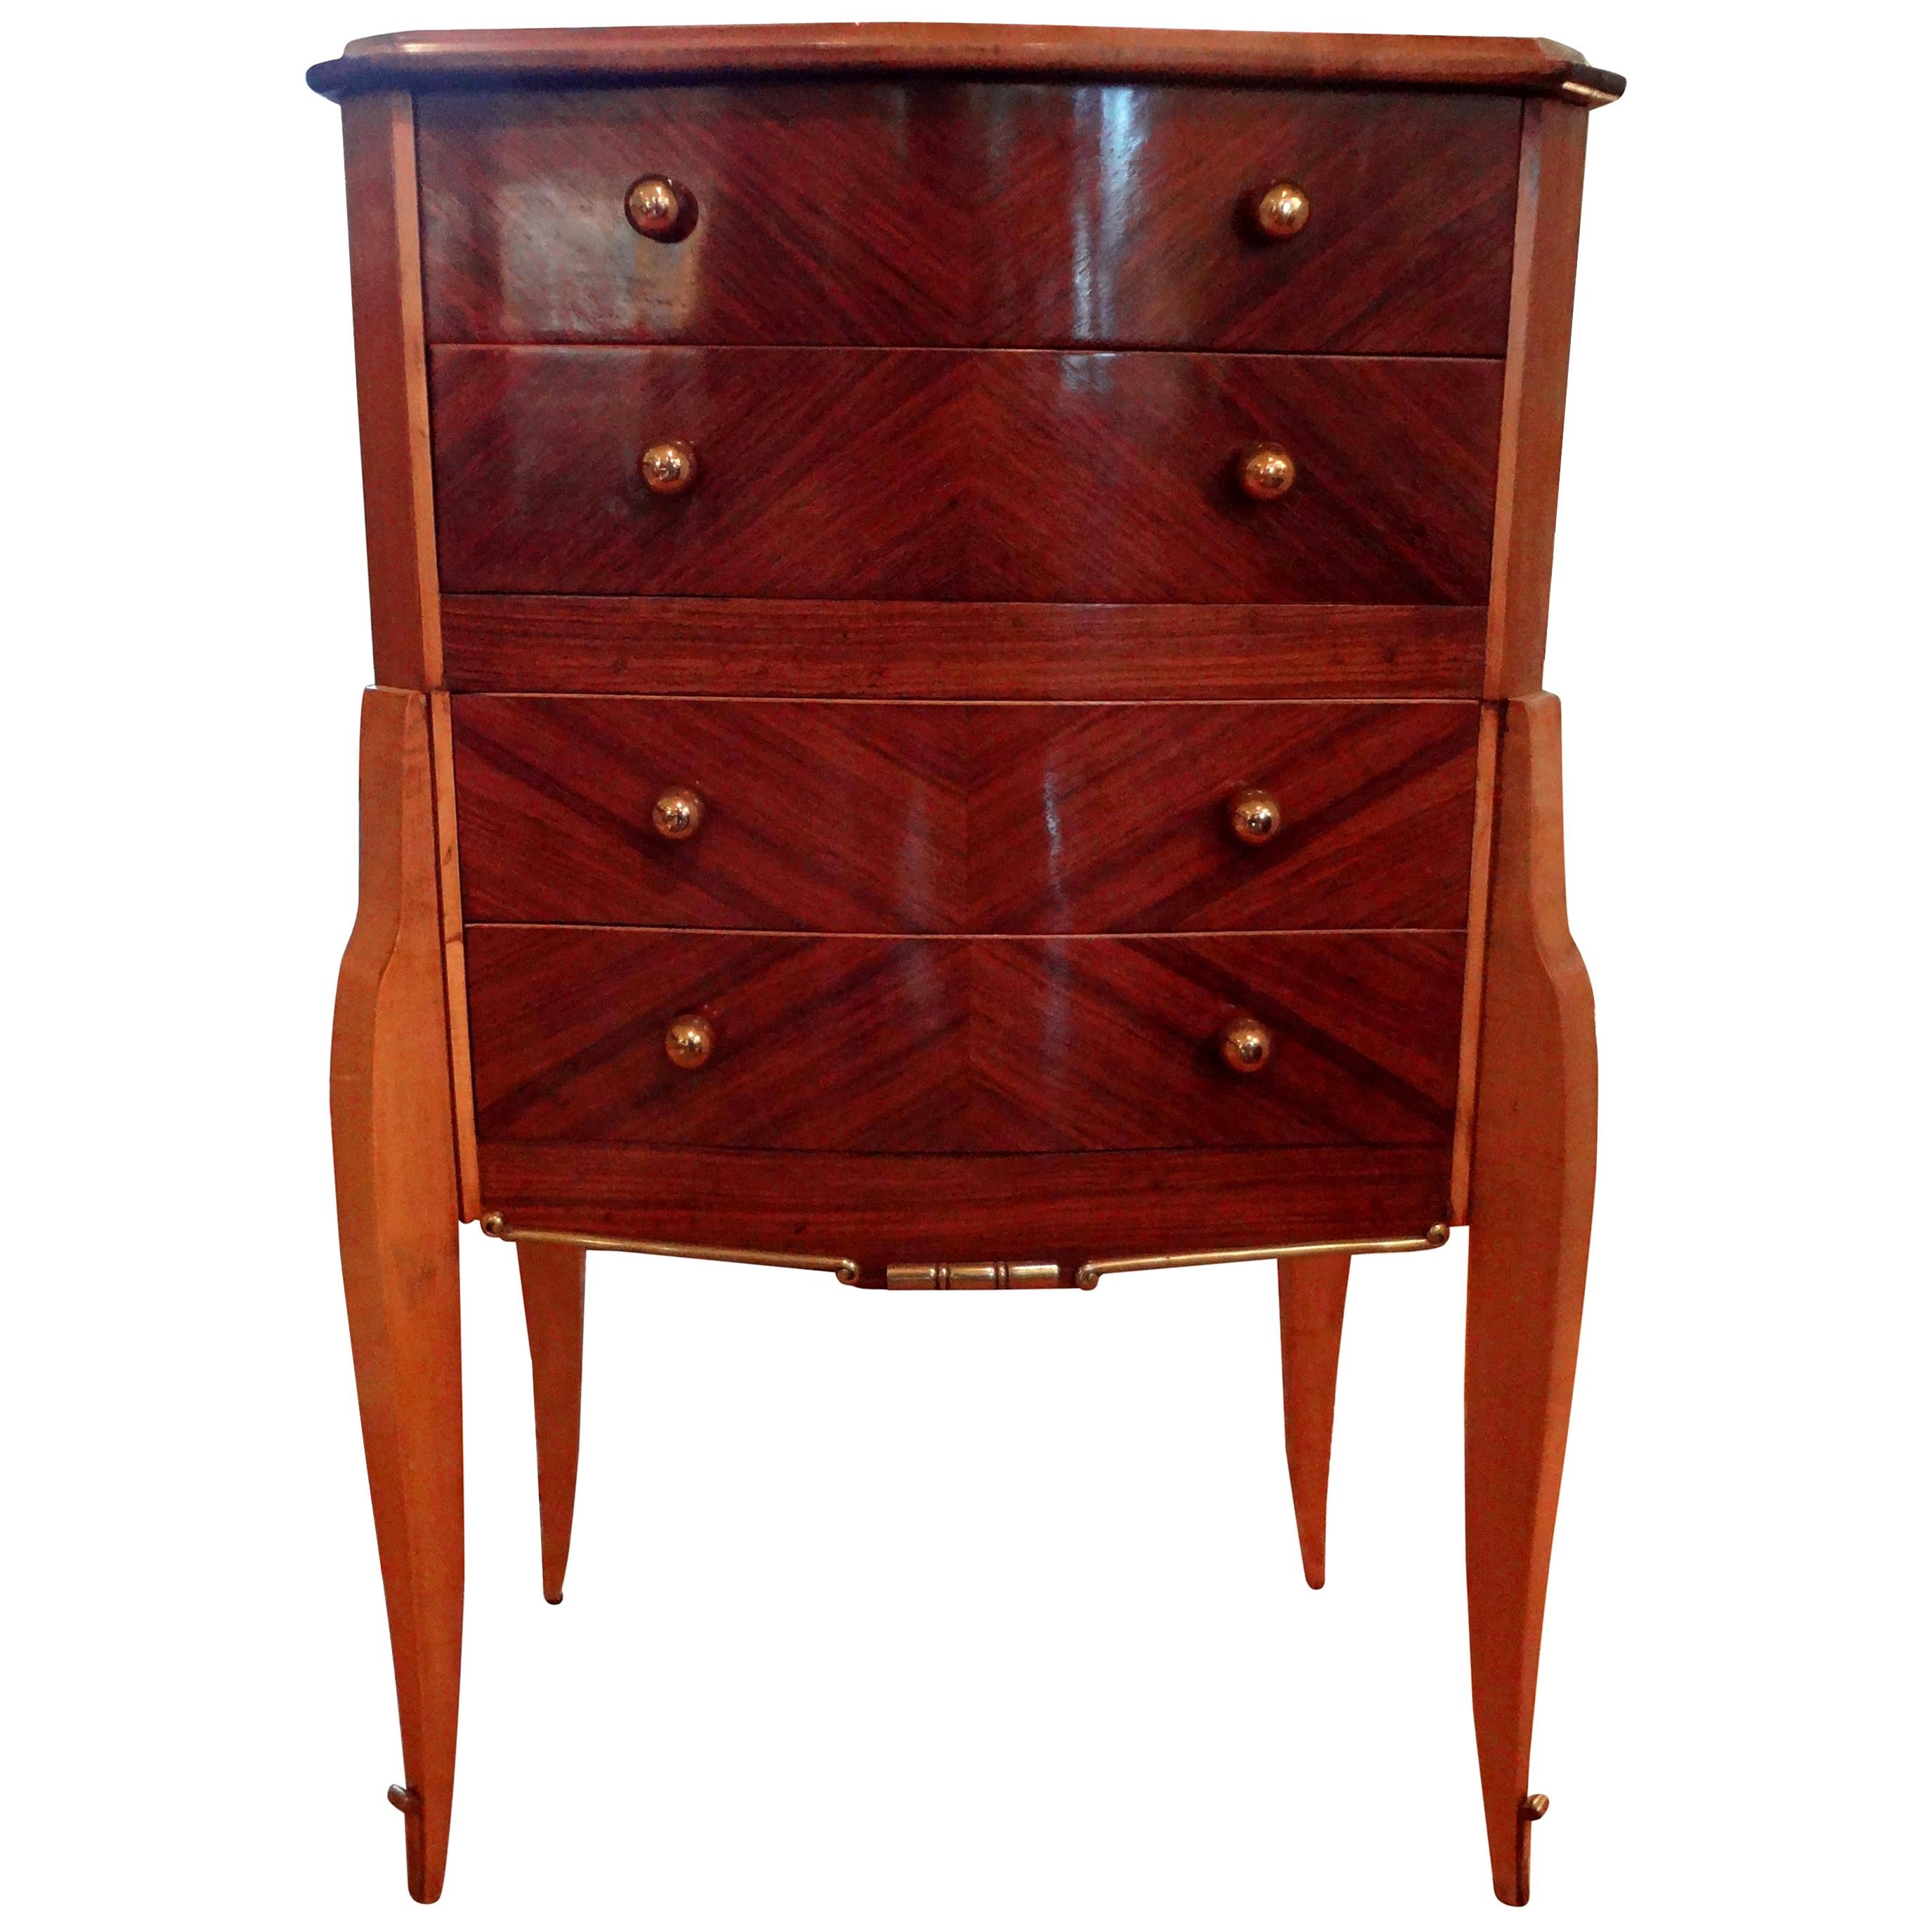 French Art Deco Commode with Bronze Hardware, circa 1935, after Jules Leleu